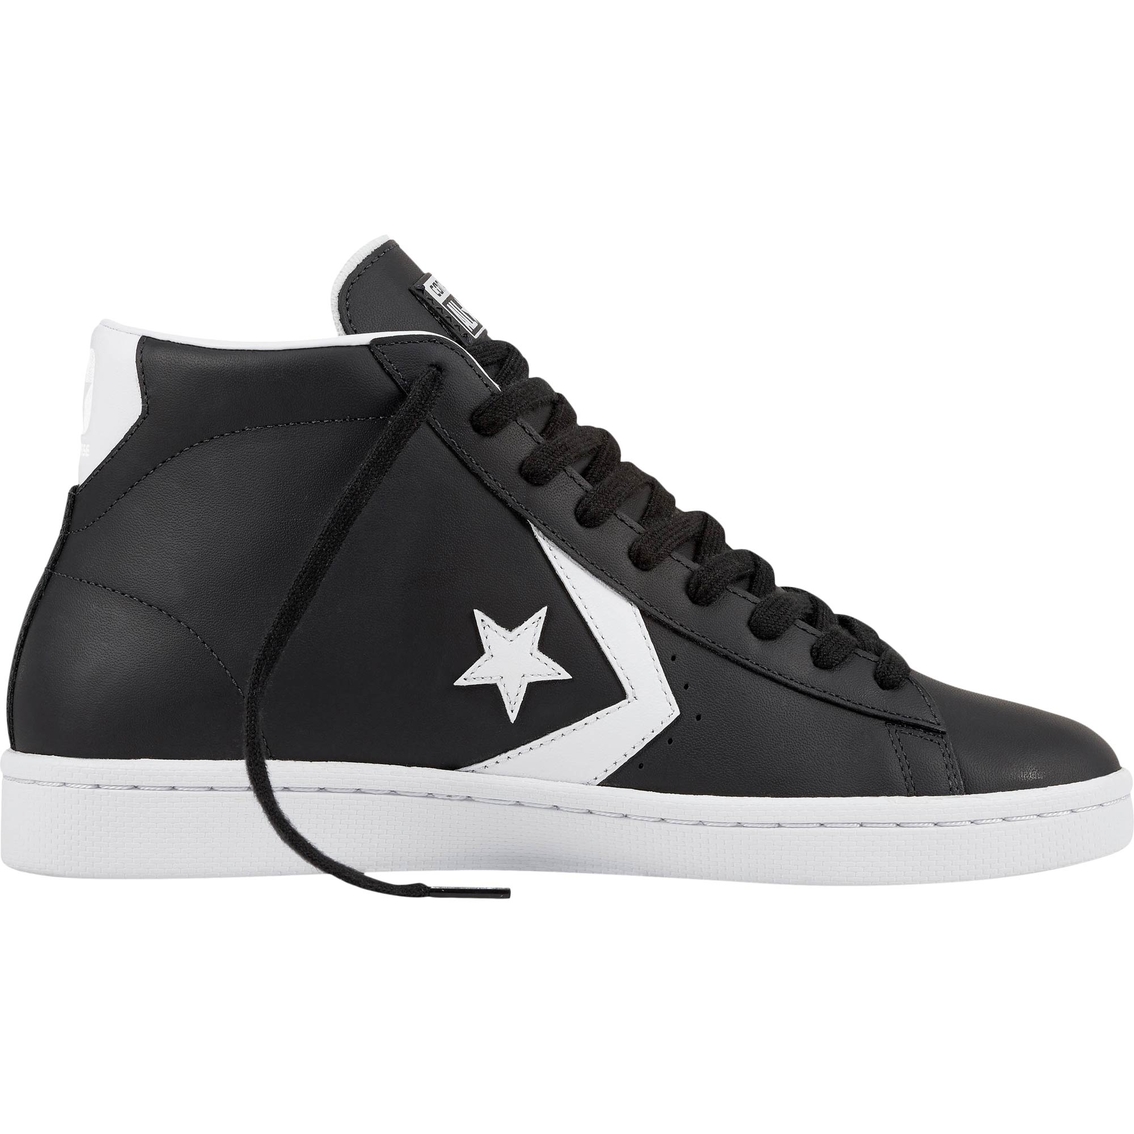 converse chuck taylor leather shoes